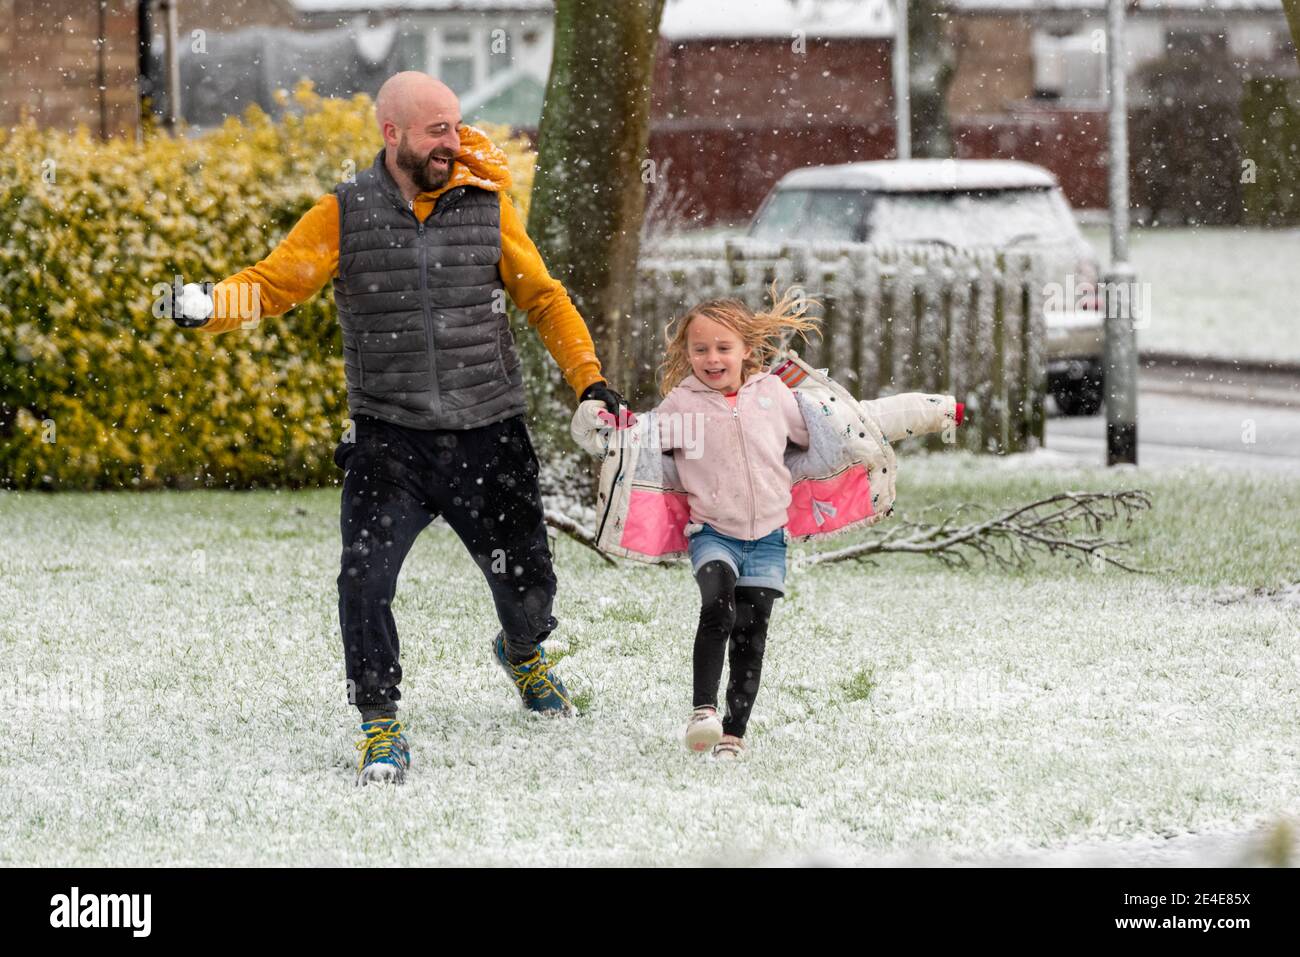 Willingham Cambridgeshire, UK. 23rd Jan, 2021. People enjoy being outside as a heavy snow shower falls in East Anglia in cold winter weather. Further snowfall is forecast across parts of the UK with freezing temperatures over the next few days. Credit: Julian Eales/Alamy Live News Stock Photo